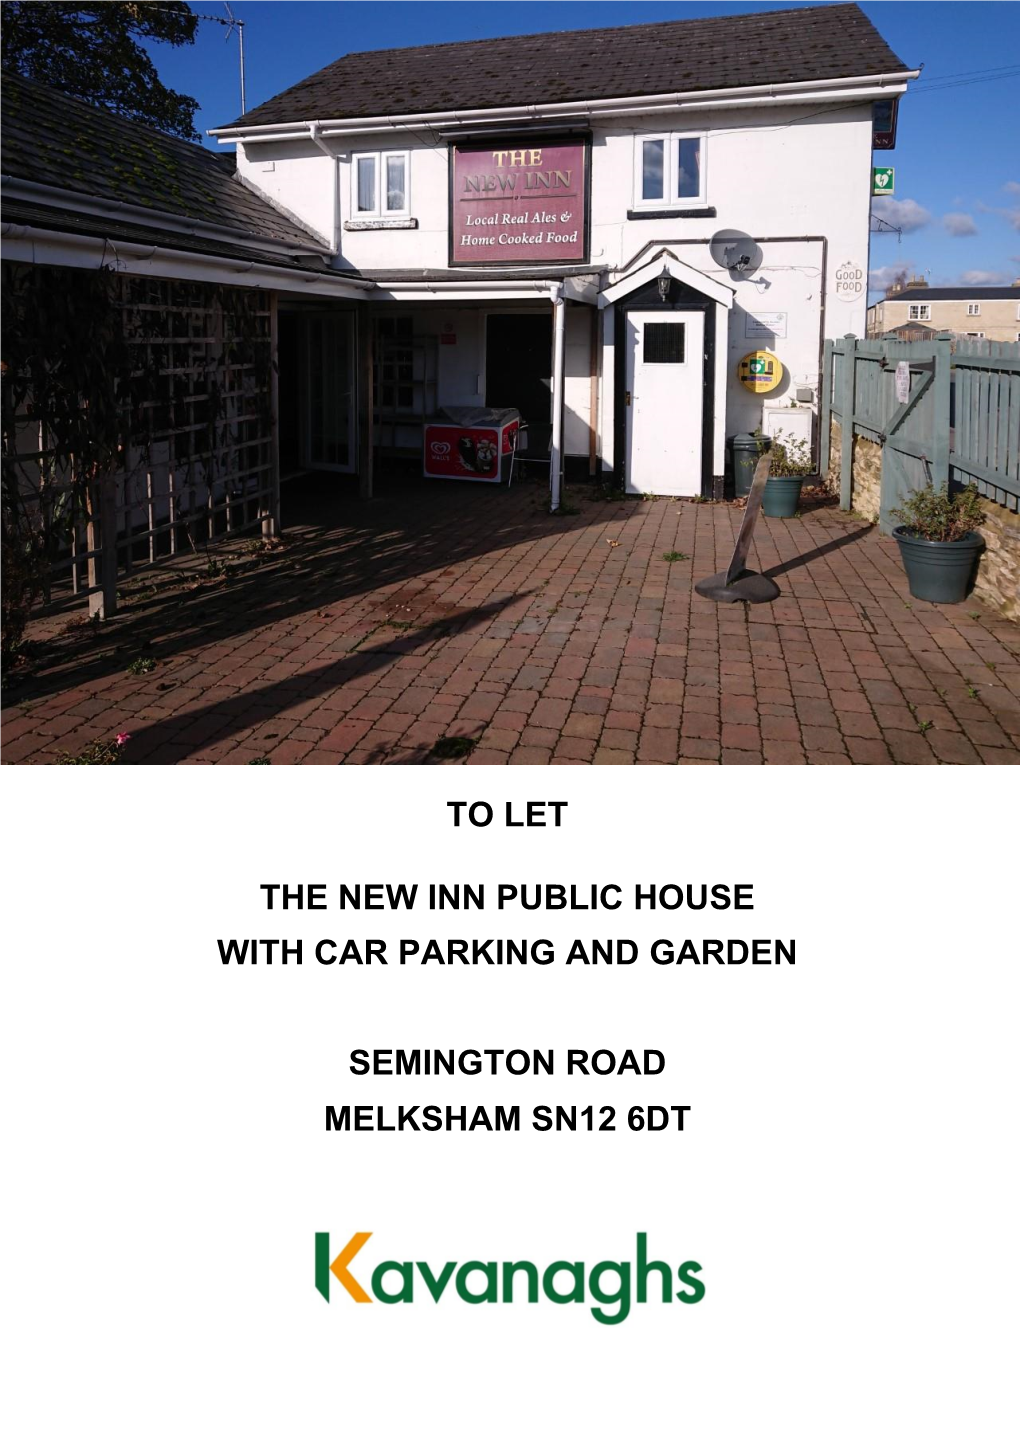 To Let the New Inn Public House with Car Parking and Garden Semington